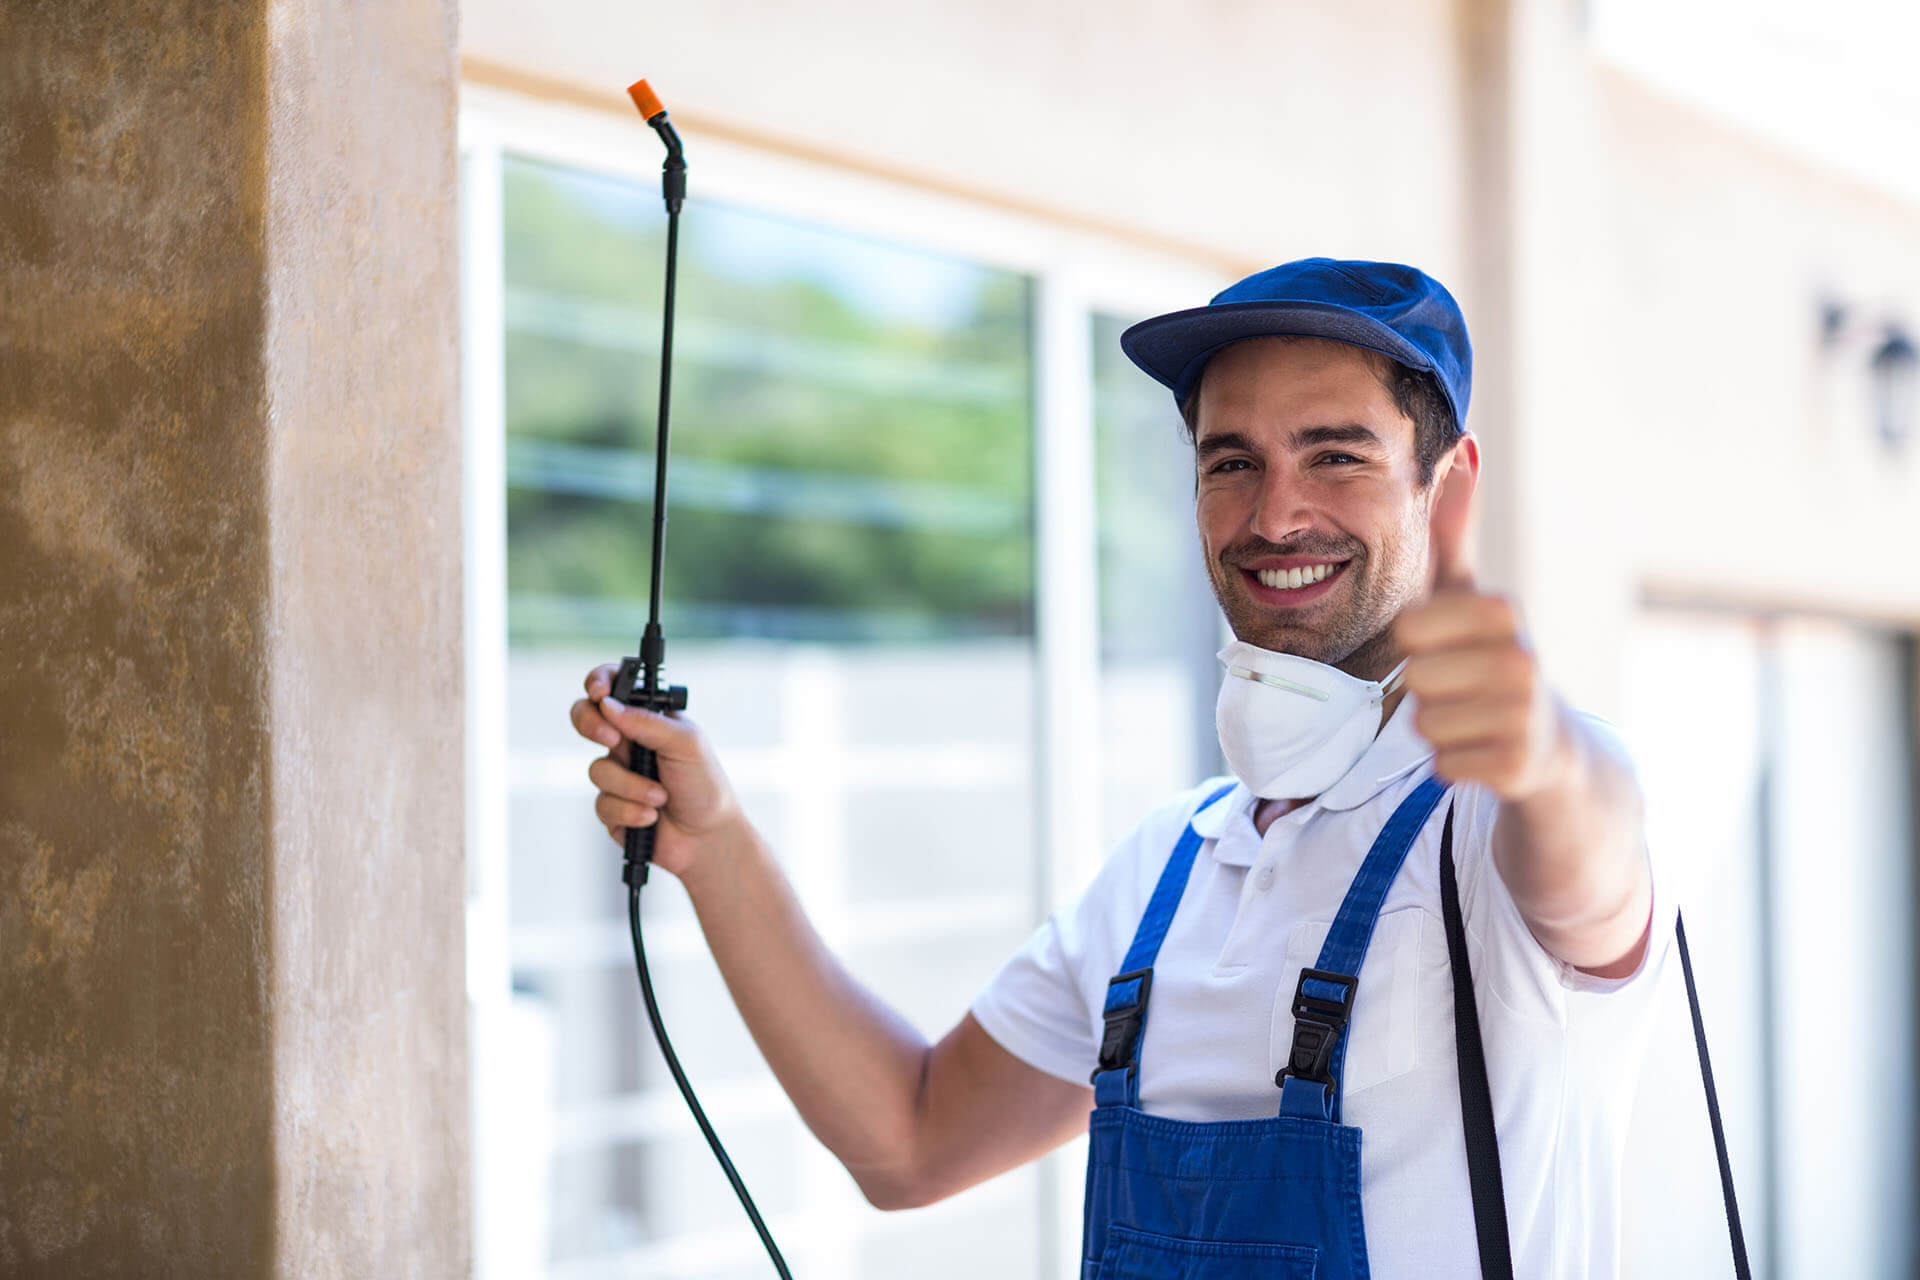 Pest Control Lewisville pest control services in Lewisville Denton or nearby cities in Denton County GA 109